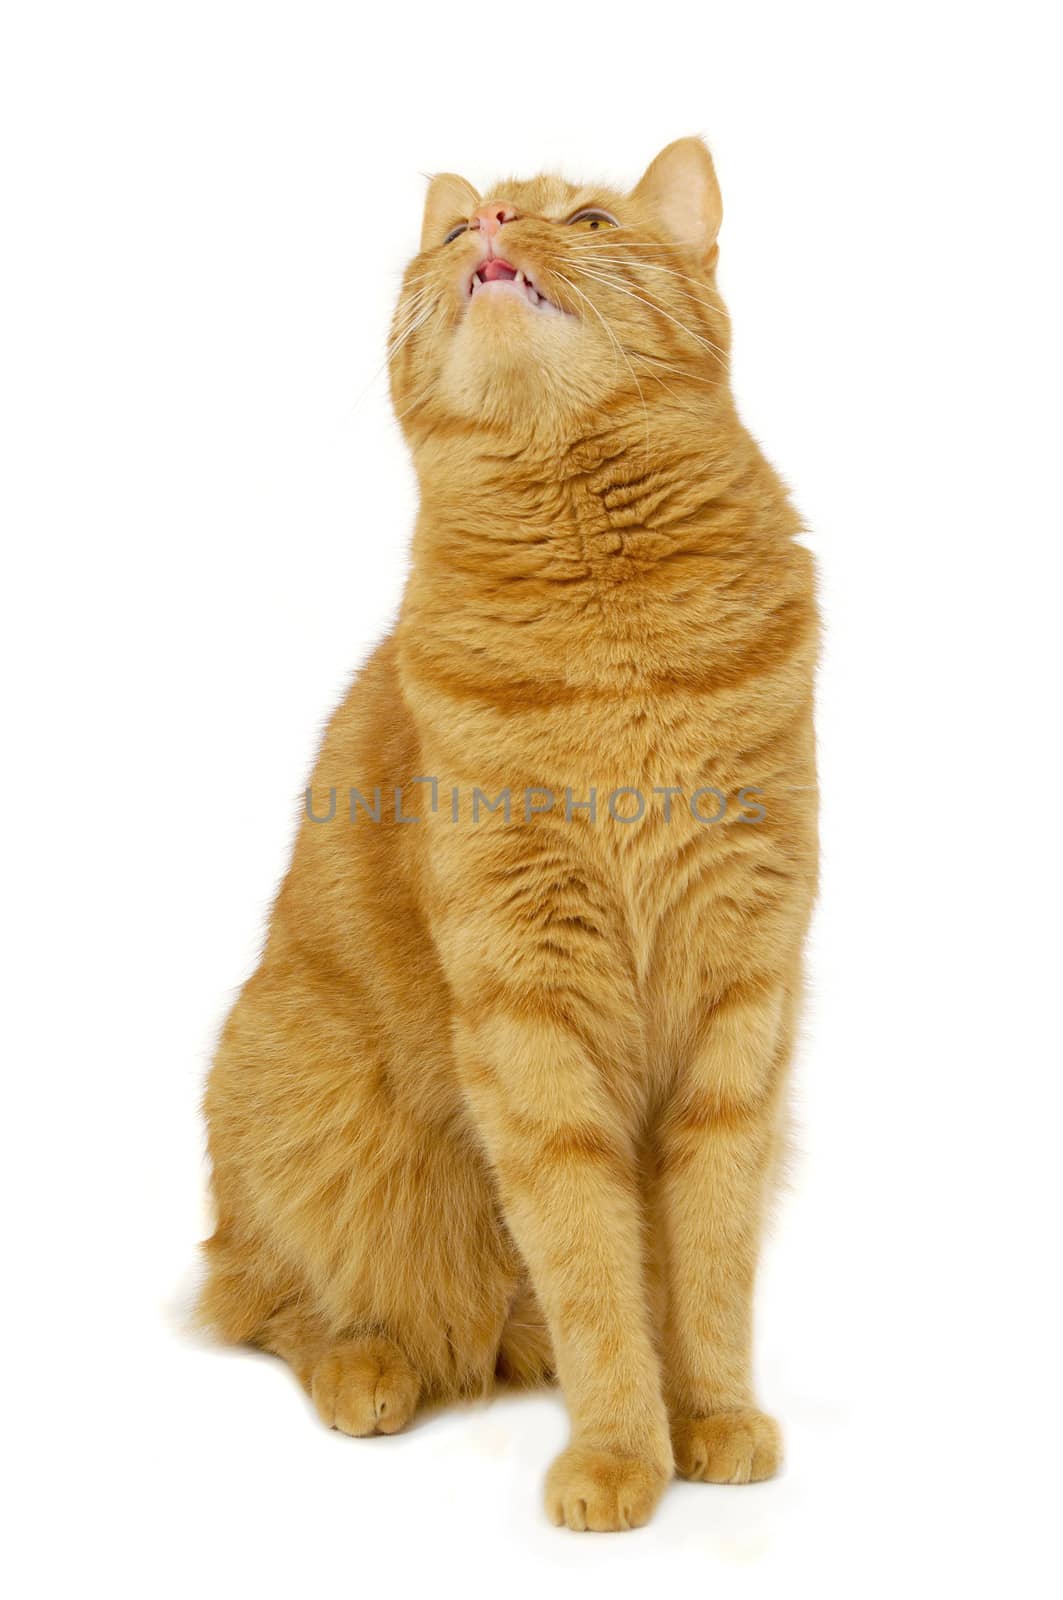 Red cat sitting on a white background